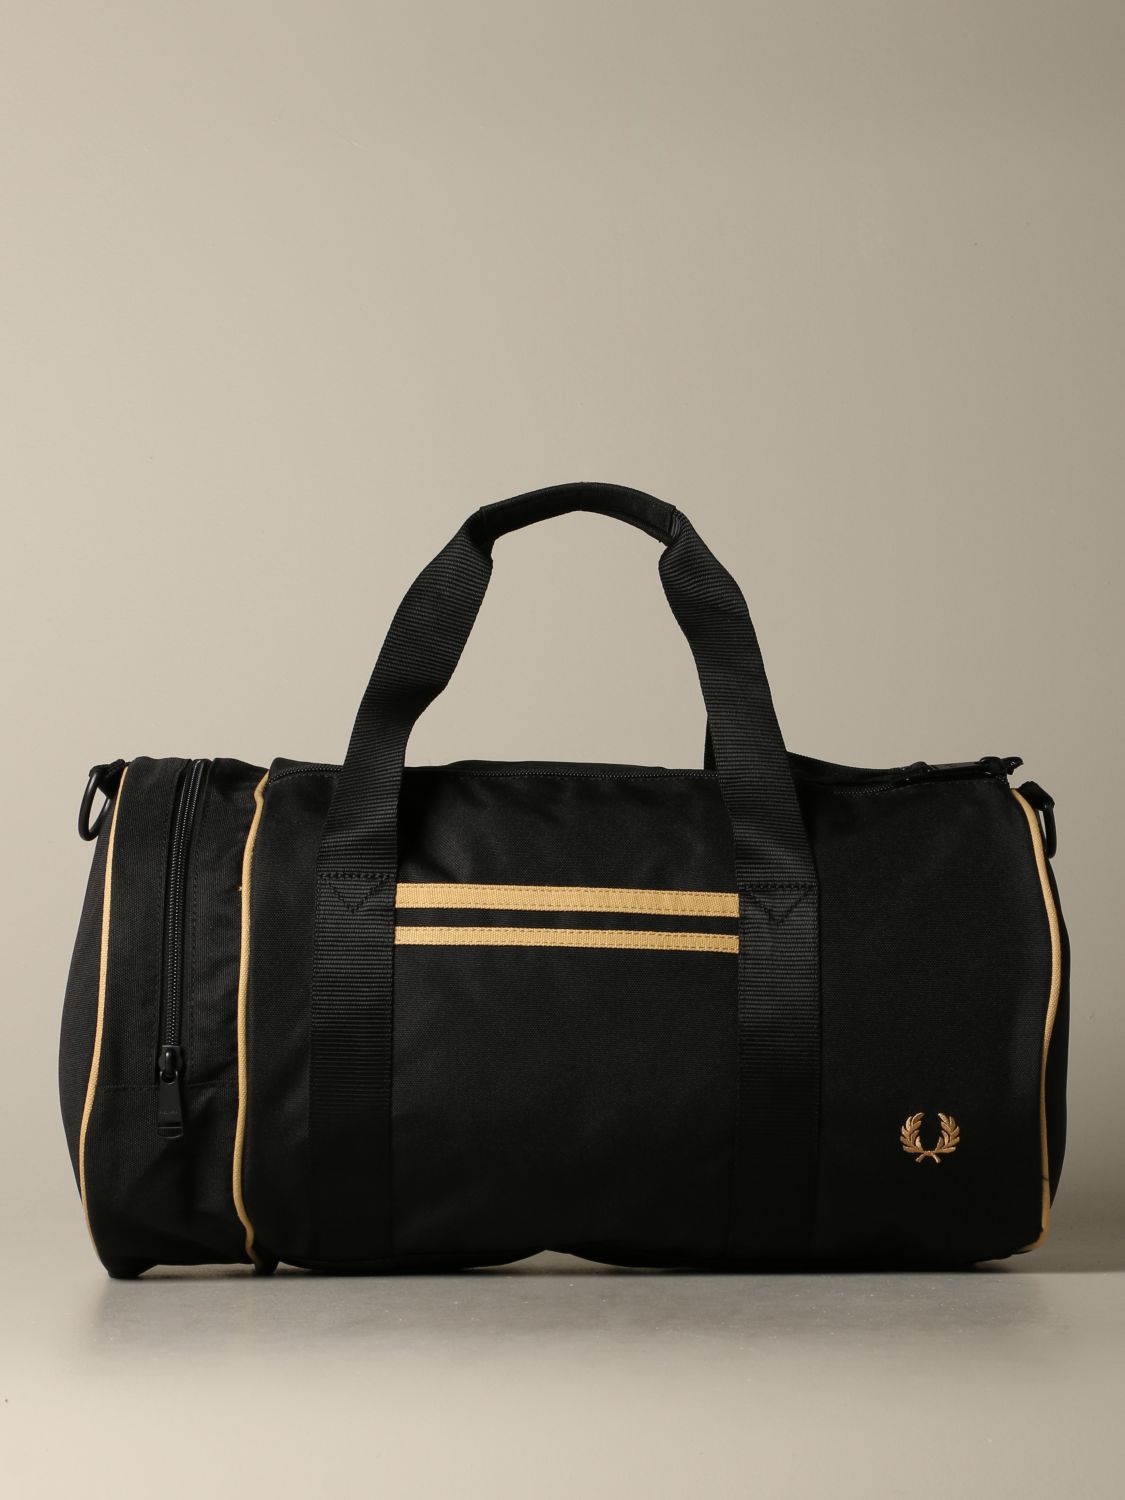 Bags men Fred Perry | Travel Bag Fred Perry Men Black | Travel Bag Fred ...